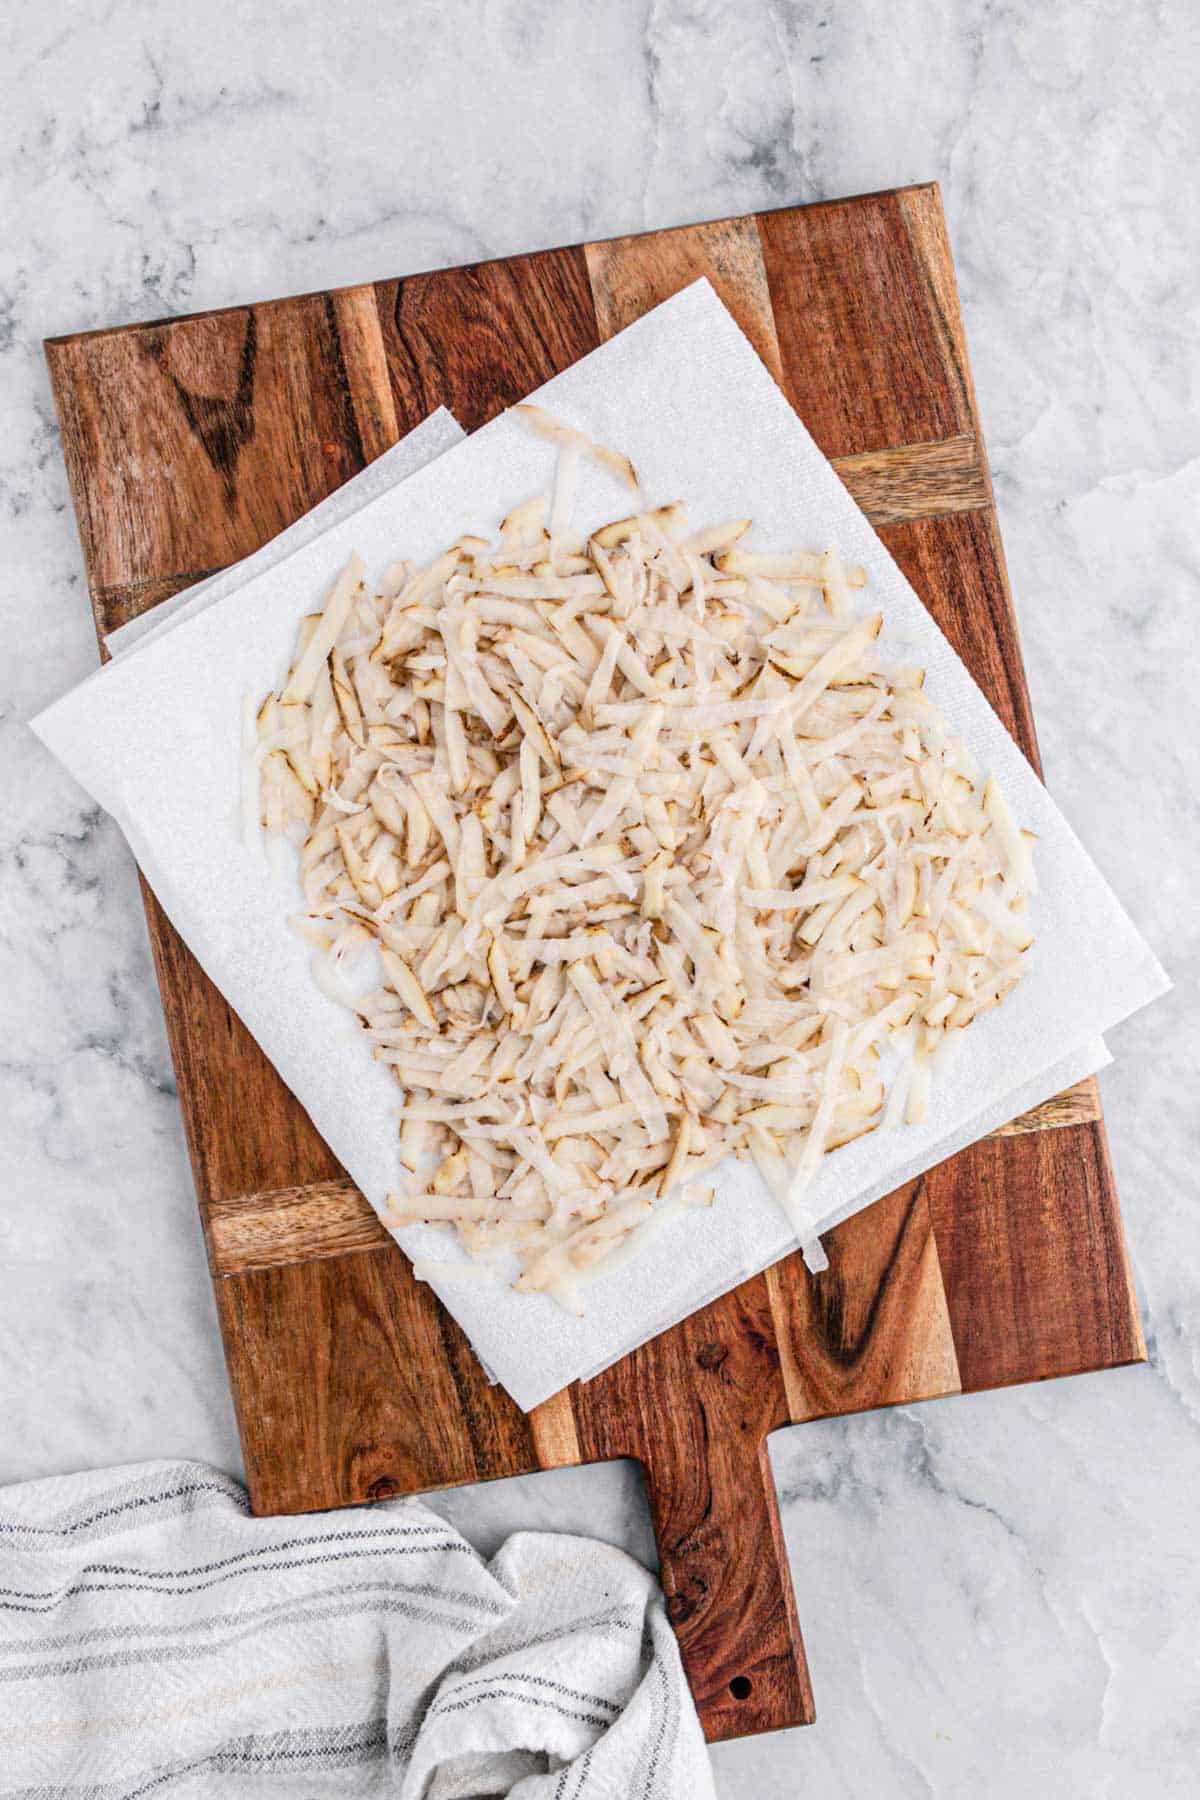 Shredded potatoes on a paper towel.